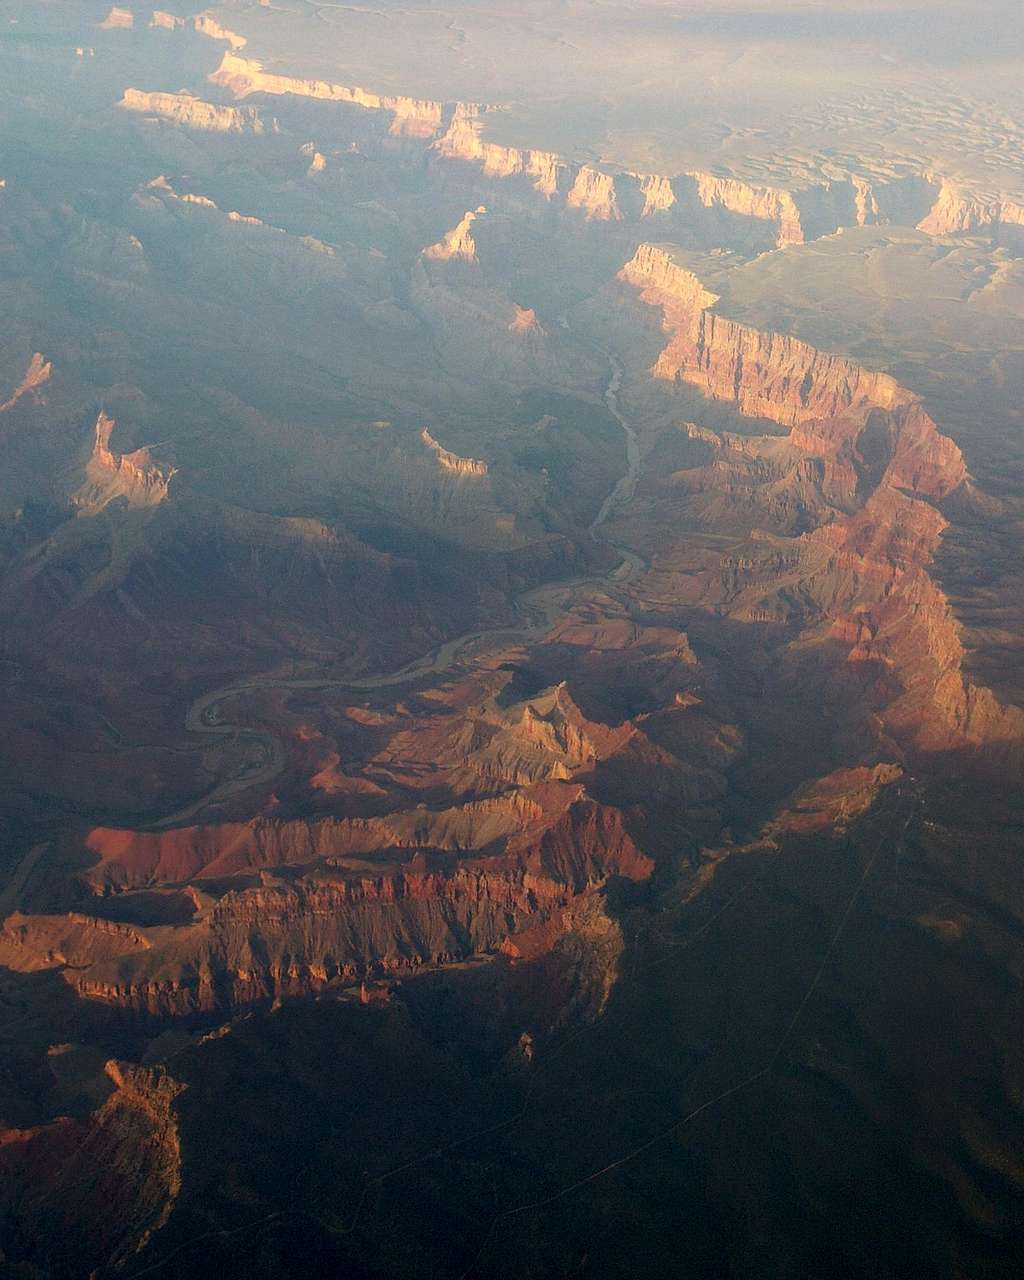 Escalante Route from the Air